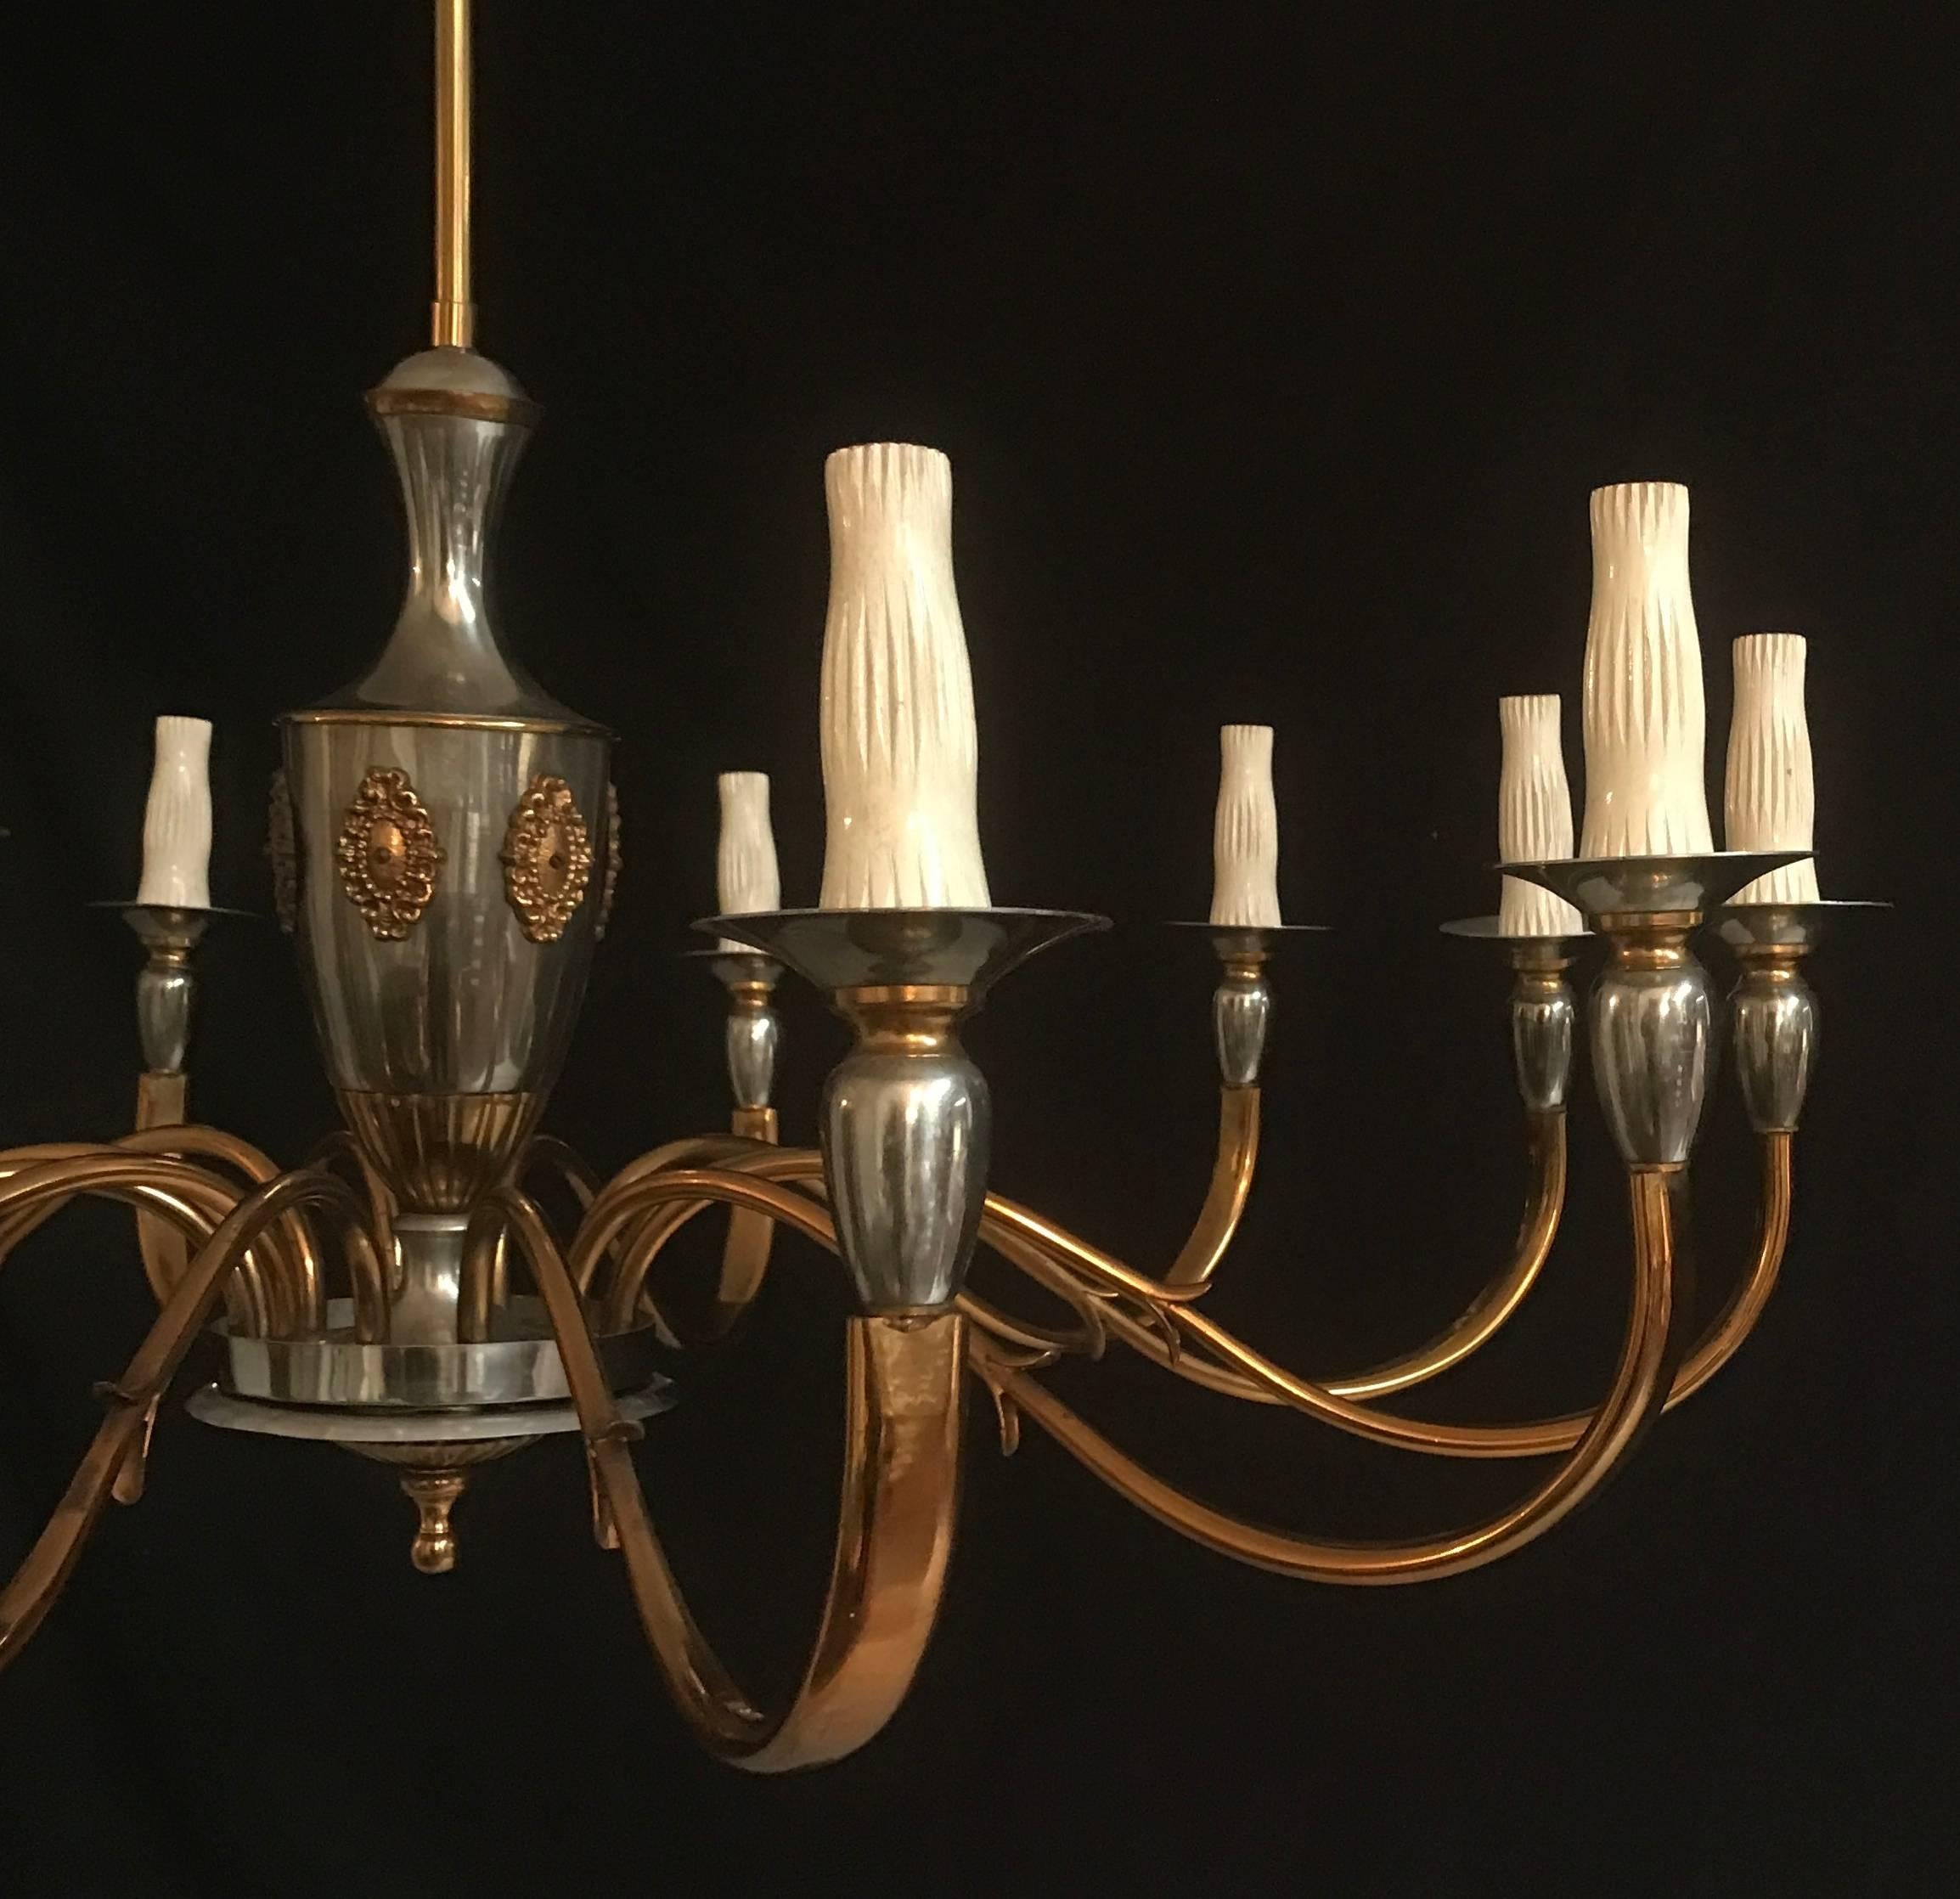 Elegant twelve-arm midcentury fixture in a perfect vintage condition.
E14 light bulbs Wired to fit US standards.